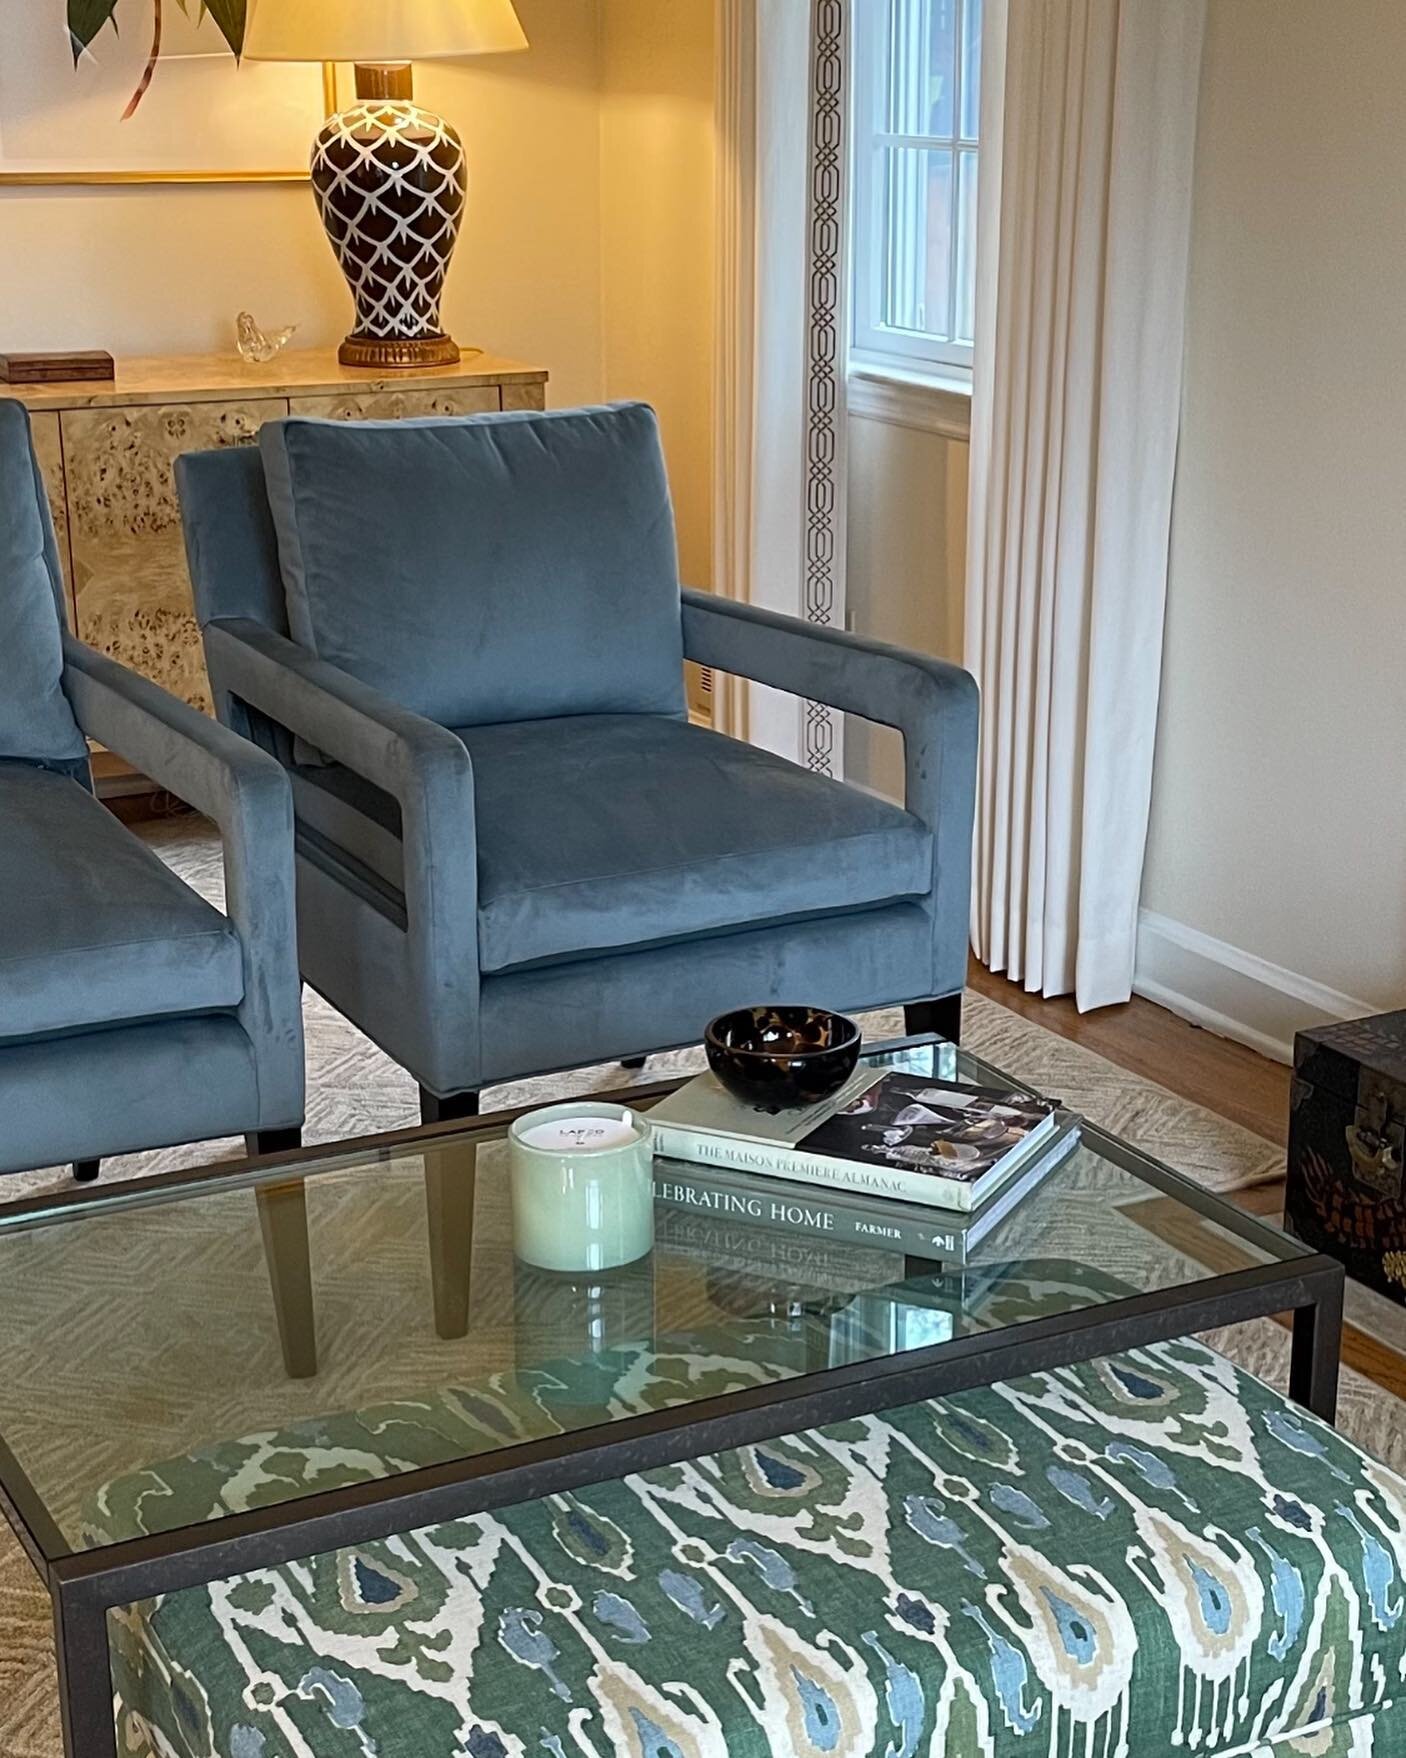 When designing this living room for our empty nest couple, one wanted a glass top coffee table, the other wanted an ottoman, we were working with limited space. Now everyone&rsquo;s happy!

#interiordesign
#ottoman
#livingroomdesign
#smallspaces
#njd